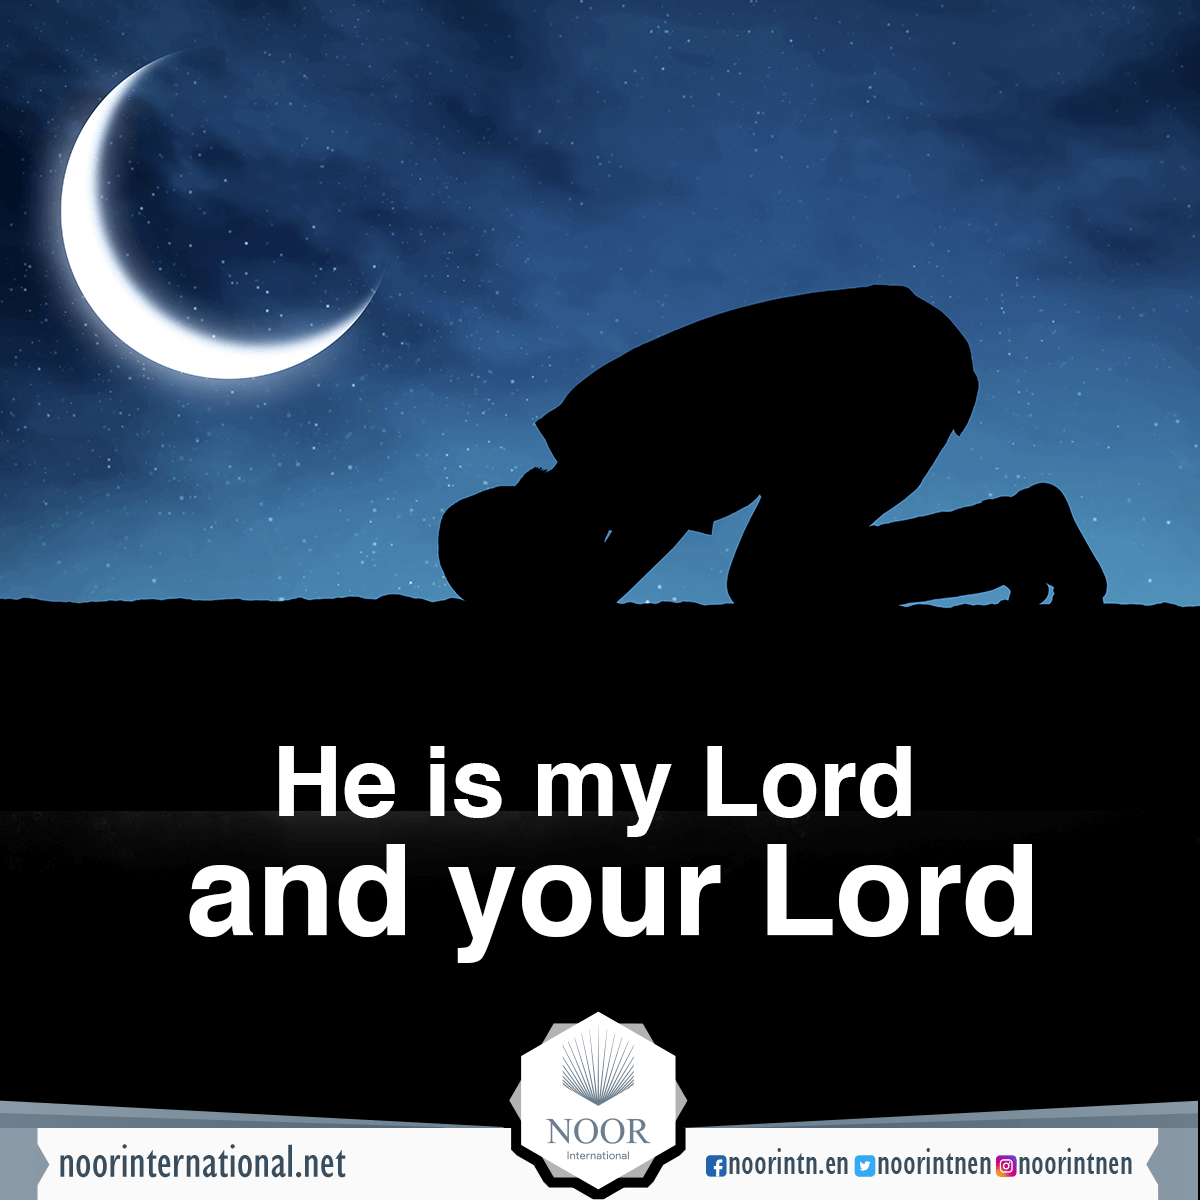 He is my Lord and your Lord